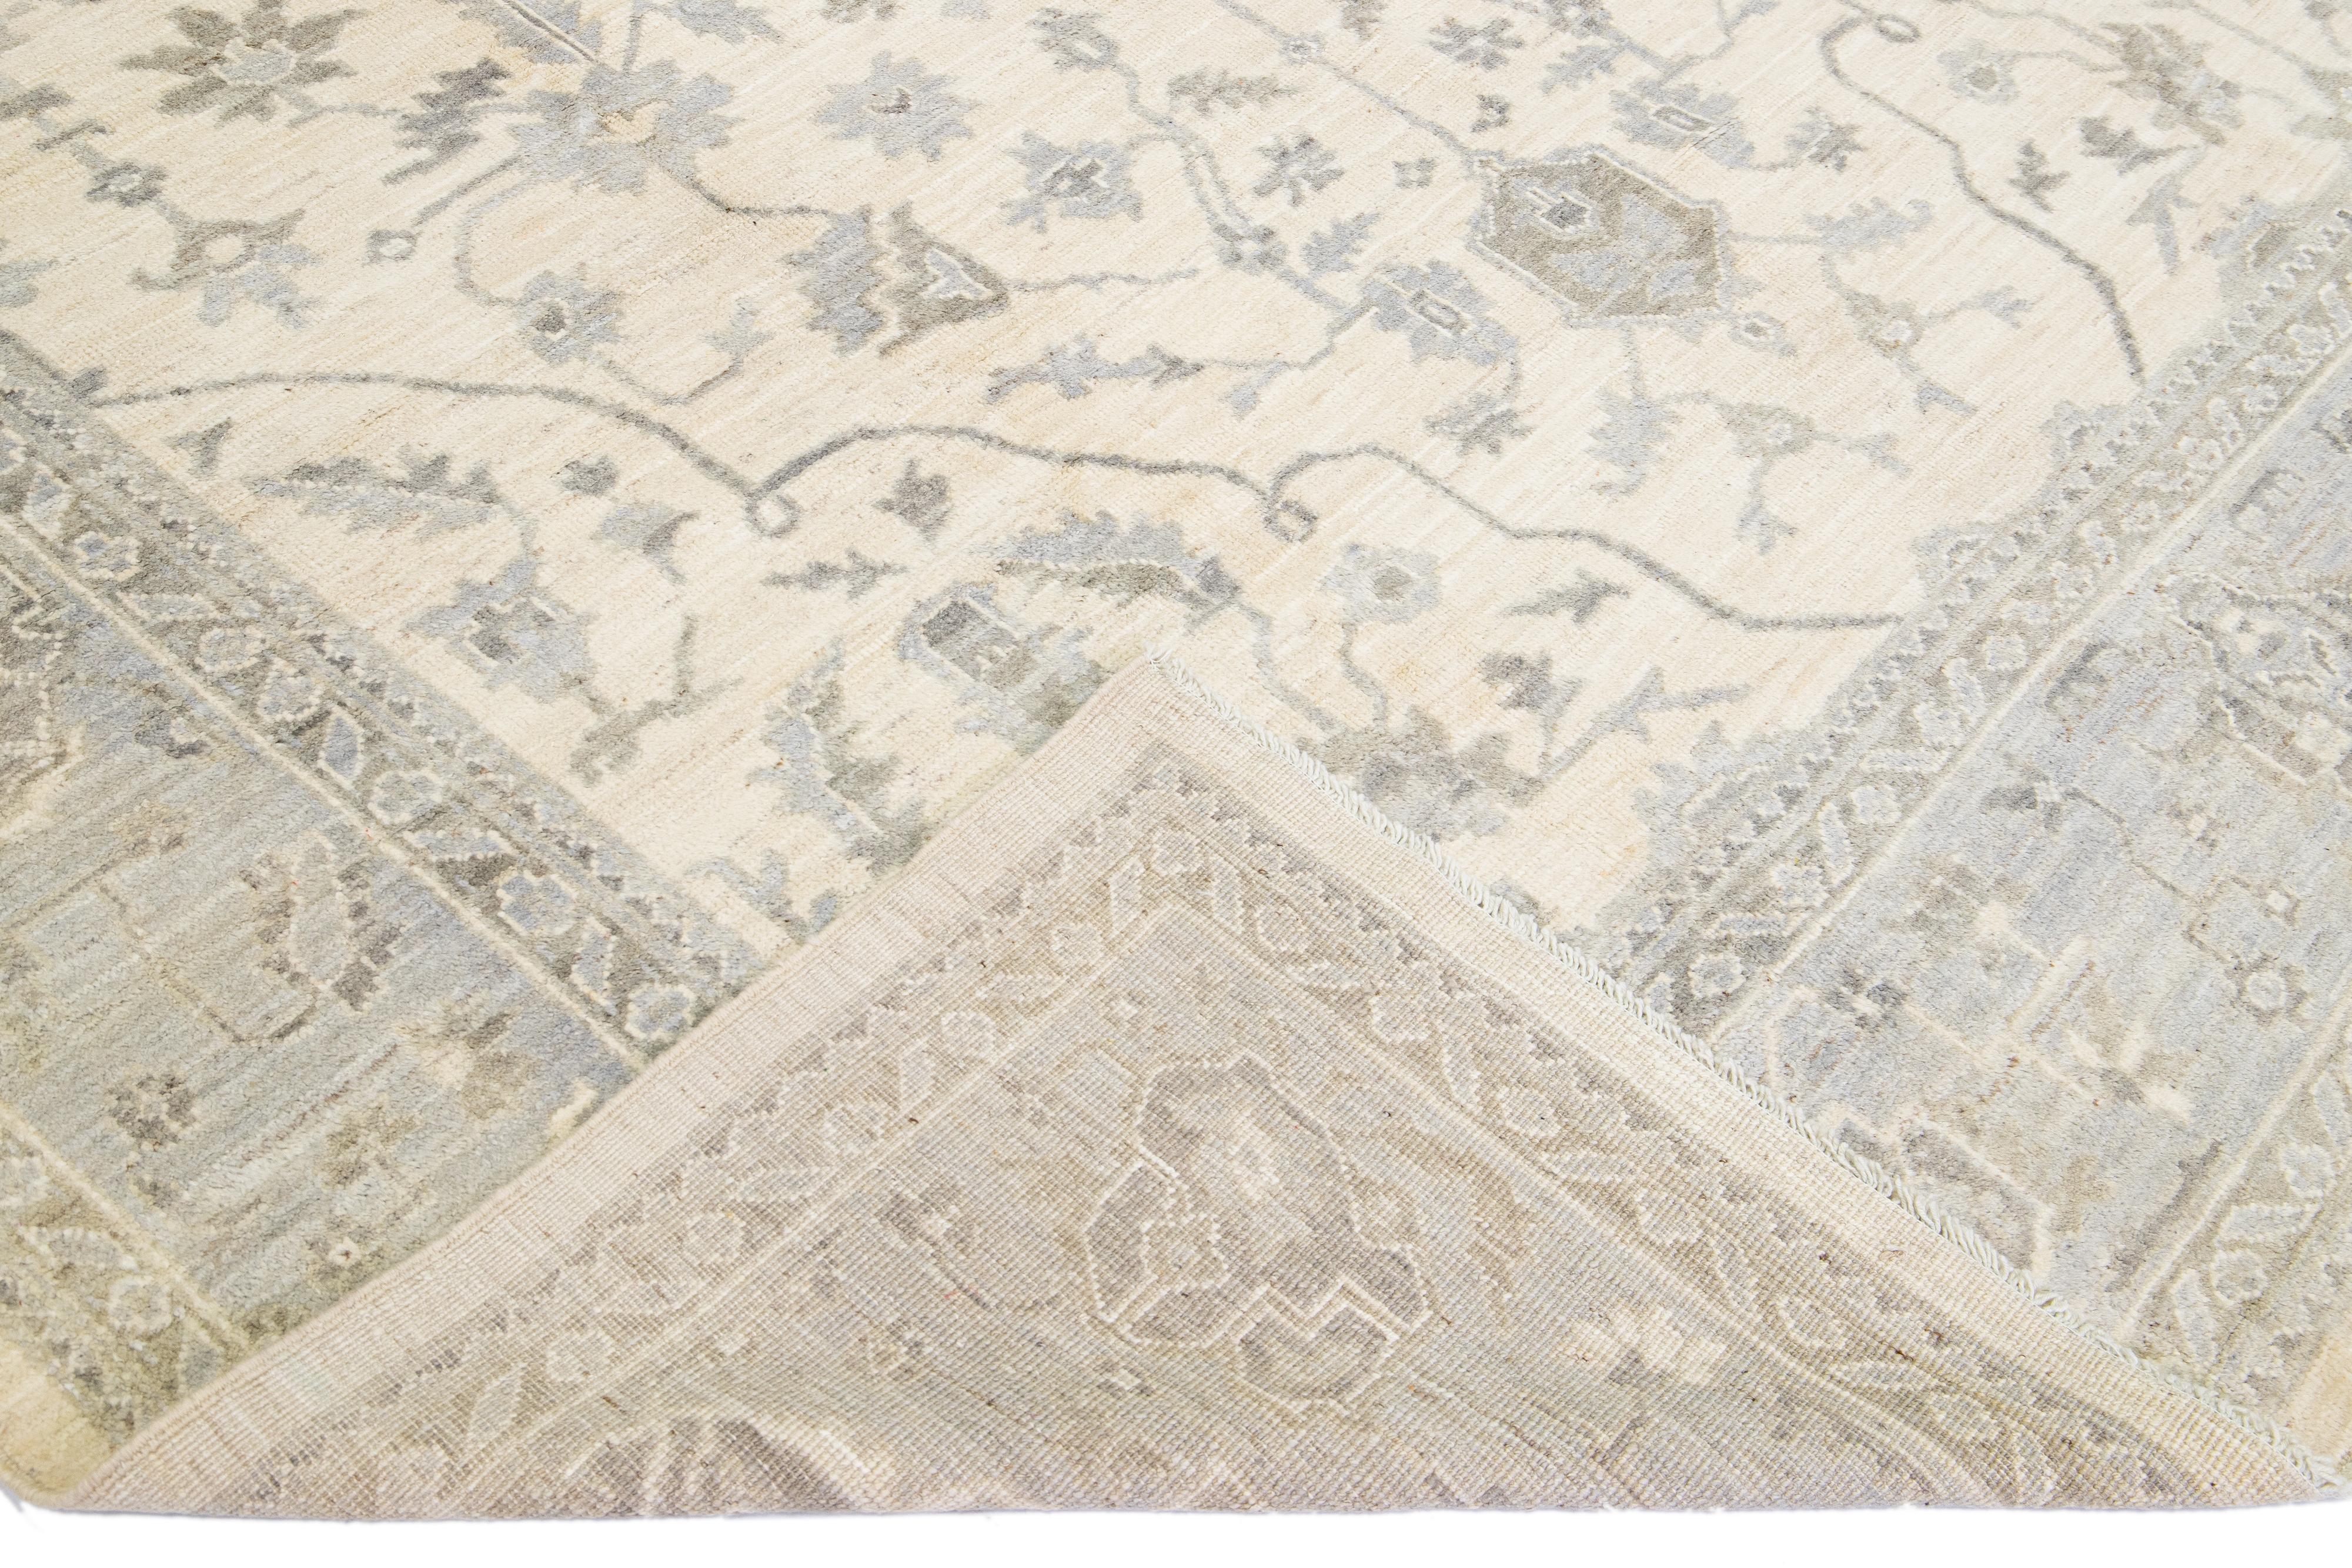 Beautiful Oushak hand-knotted wool rug with a beige field. This modern rug has a gray frame and accents of blue and brown in a gorgeous all-over classic medallion motif.

This rug measures: 10'1